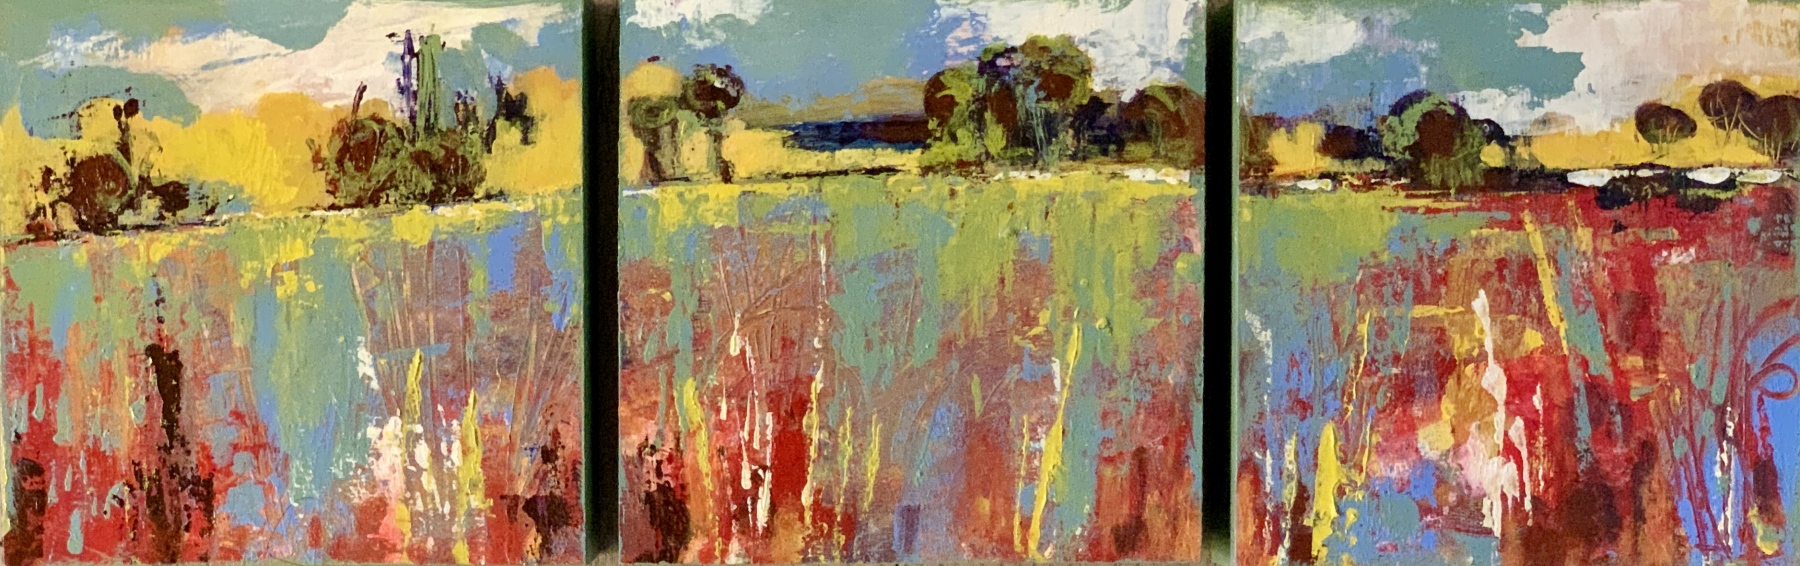 SOLD - SUMMER IN THE COUNTRY